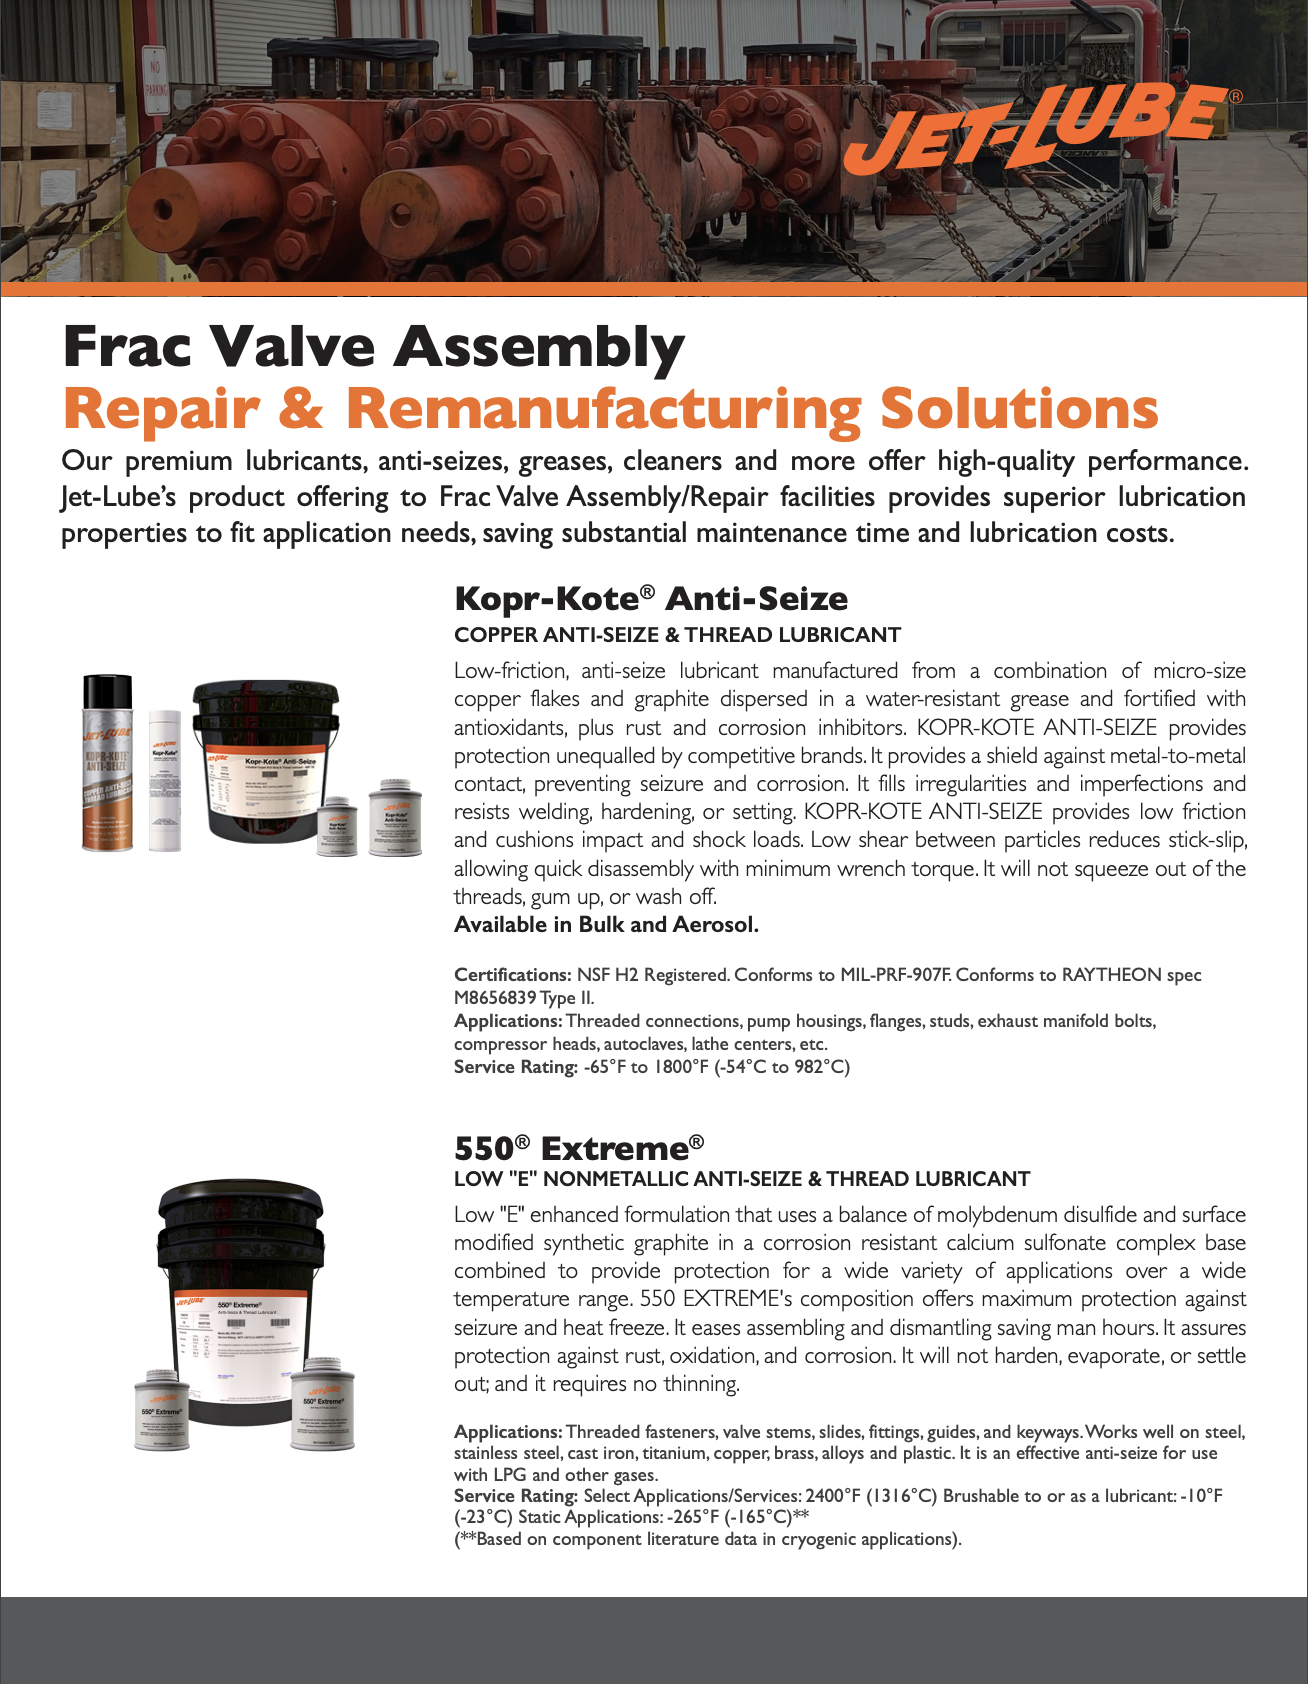 SS_Frac Valve Assembly Repair & Remanufacturing Solutions_English